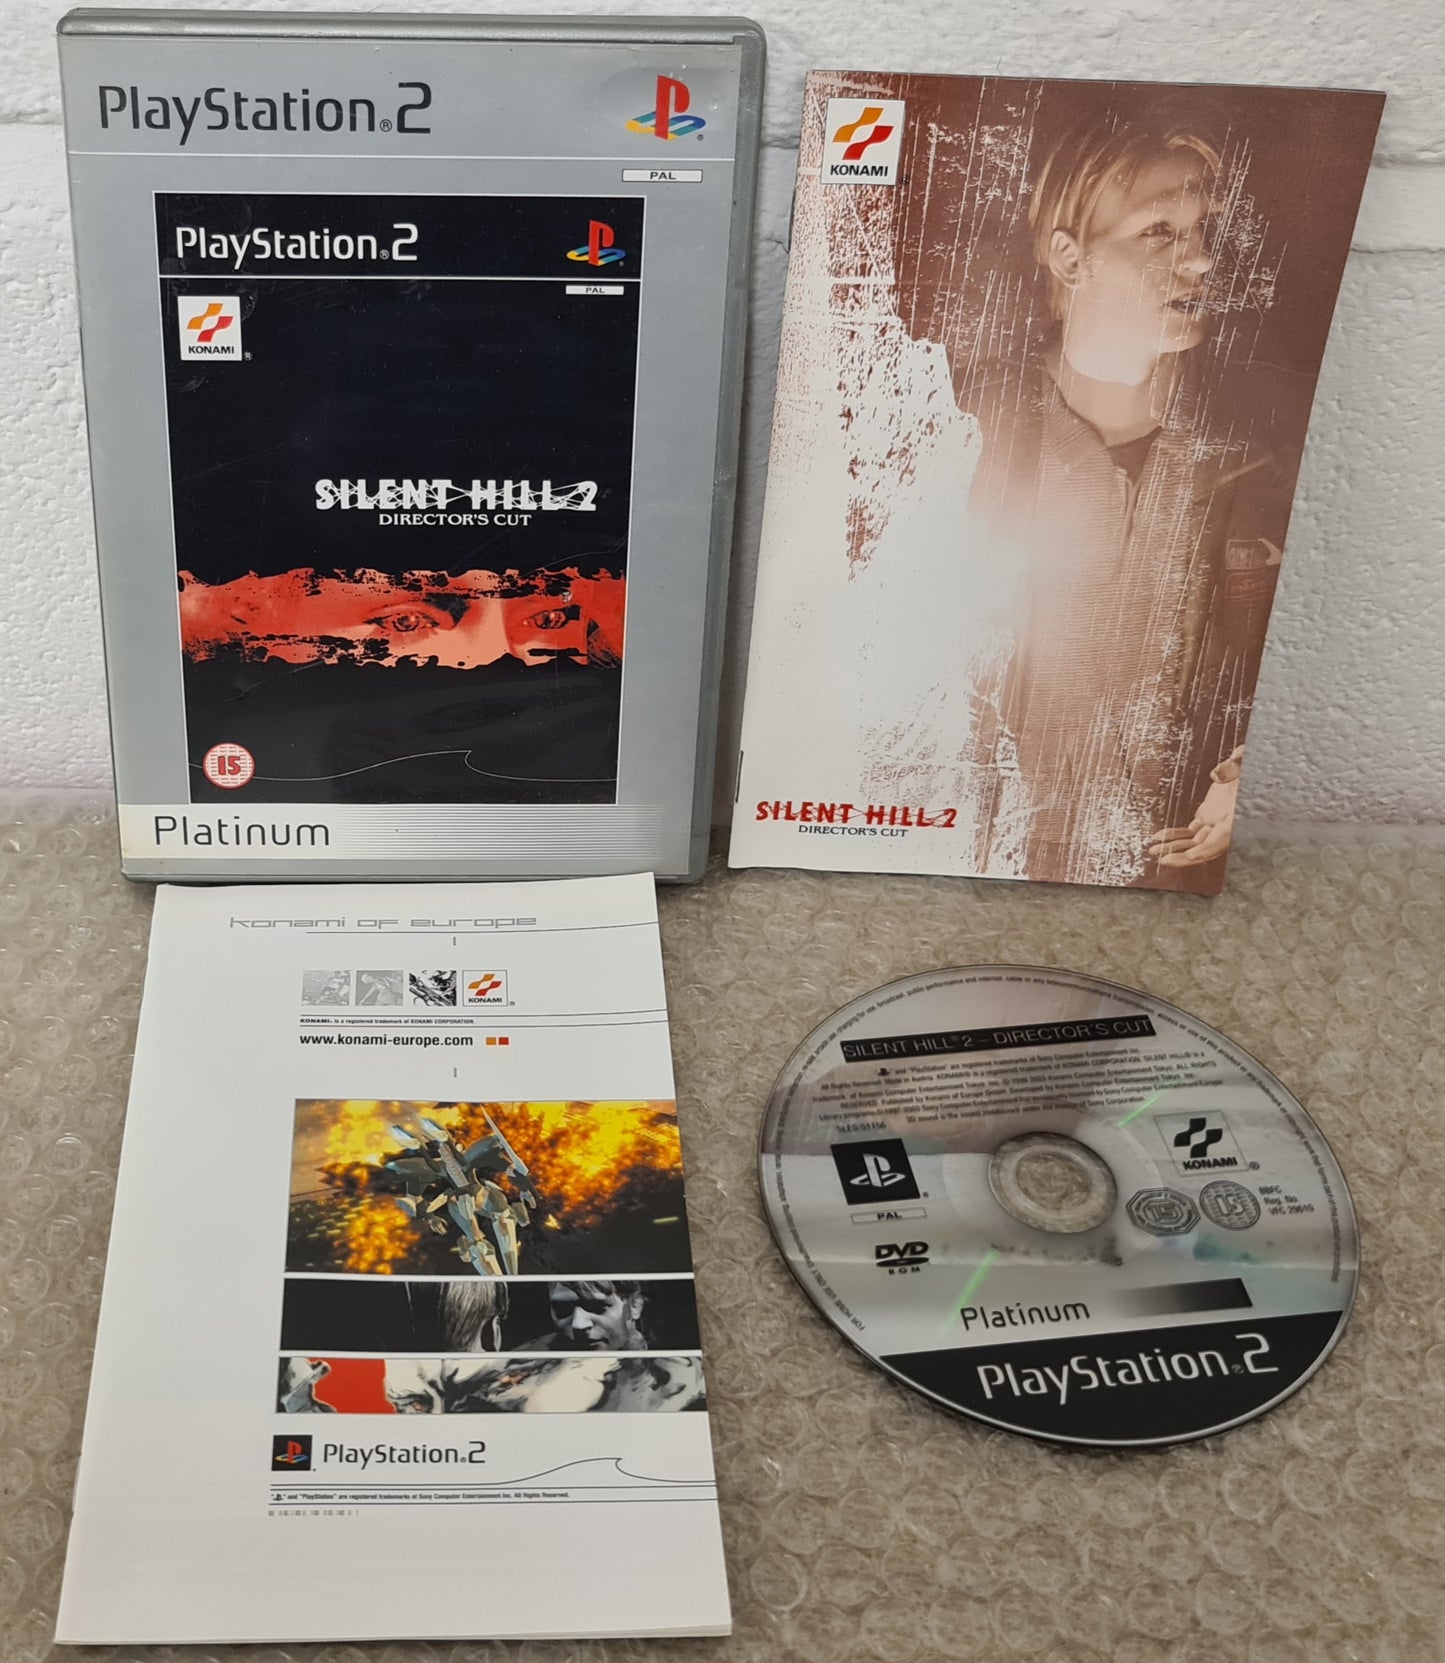 Silent Hill 2 Directors Cut Sony Playstation 2 (PS2) Game